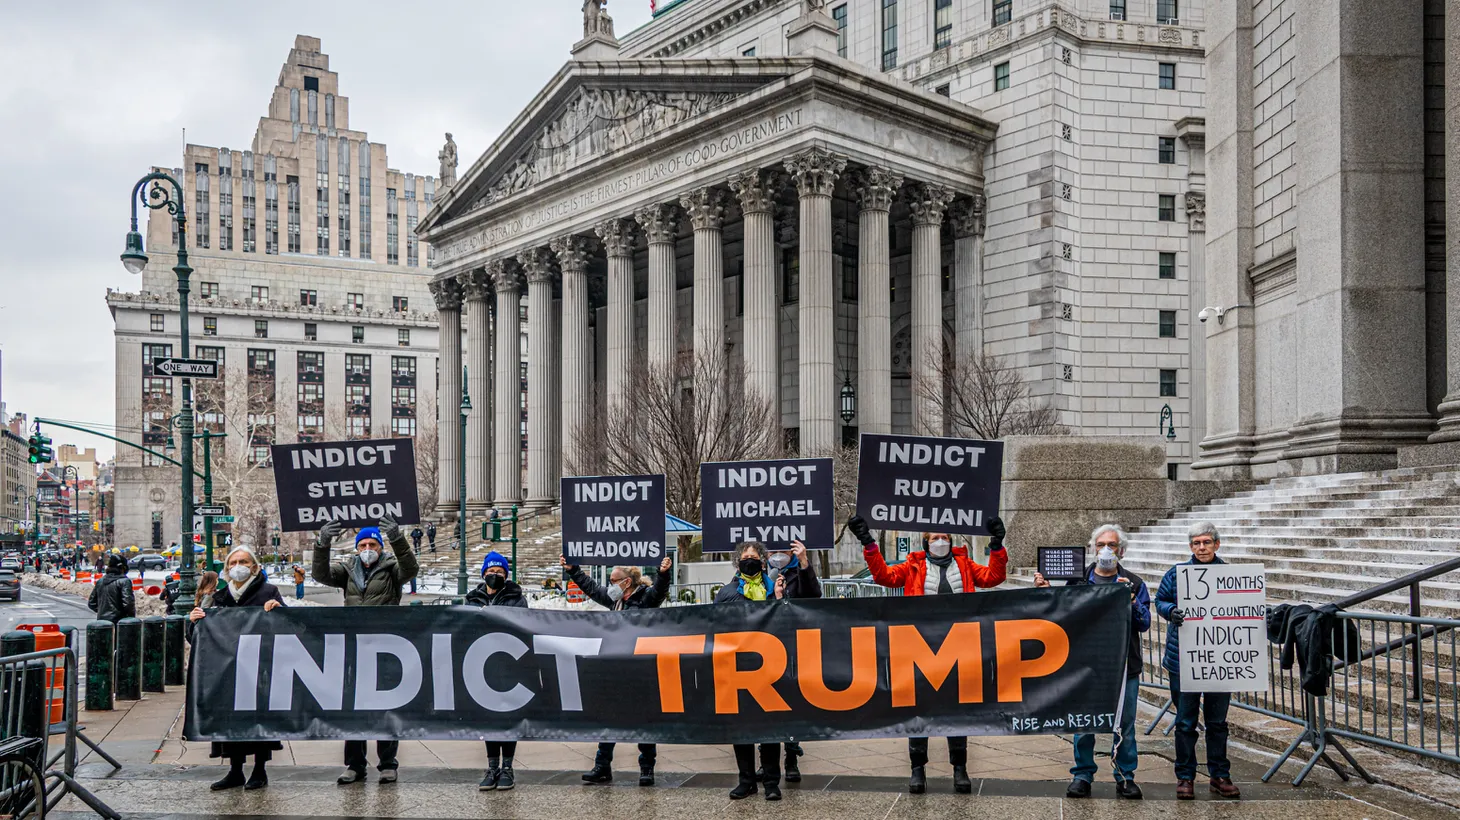 Activists gathered in New York on February 2, 2022 to demand the indictments of everyone involved in the planning of the January 6, 2021 attack on the U.S. Capitol be indicted.